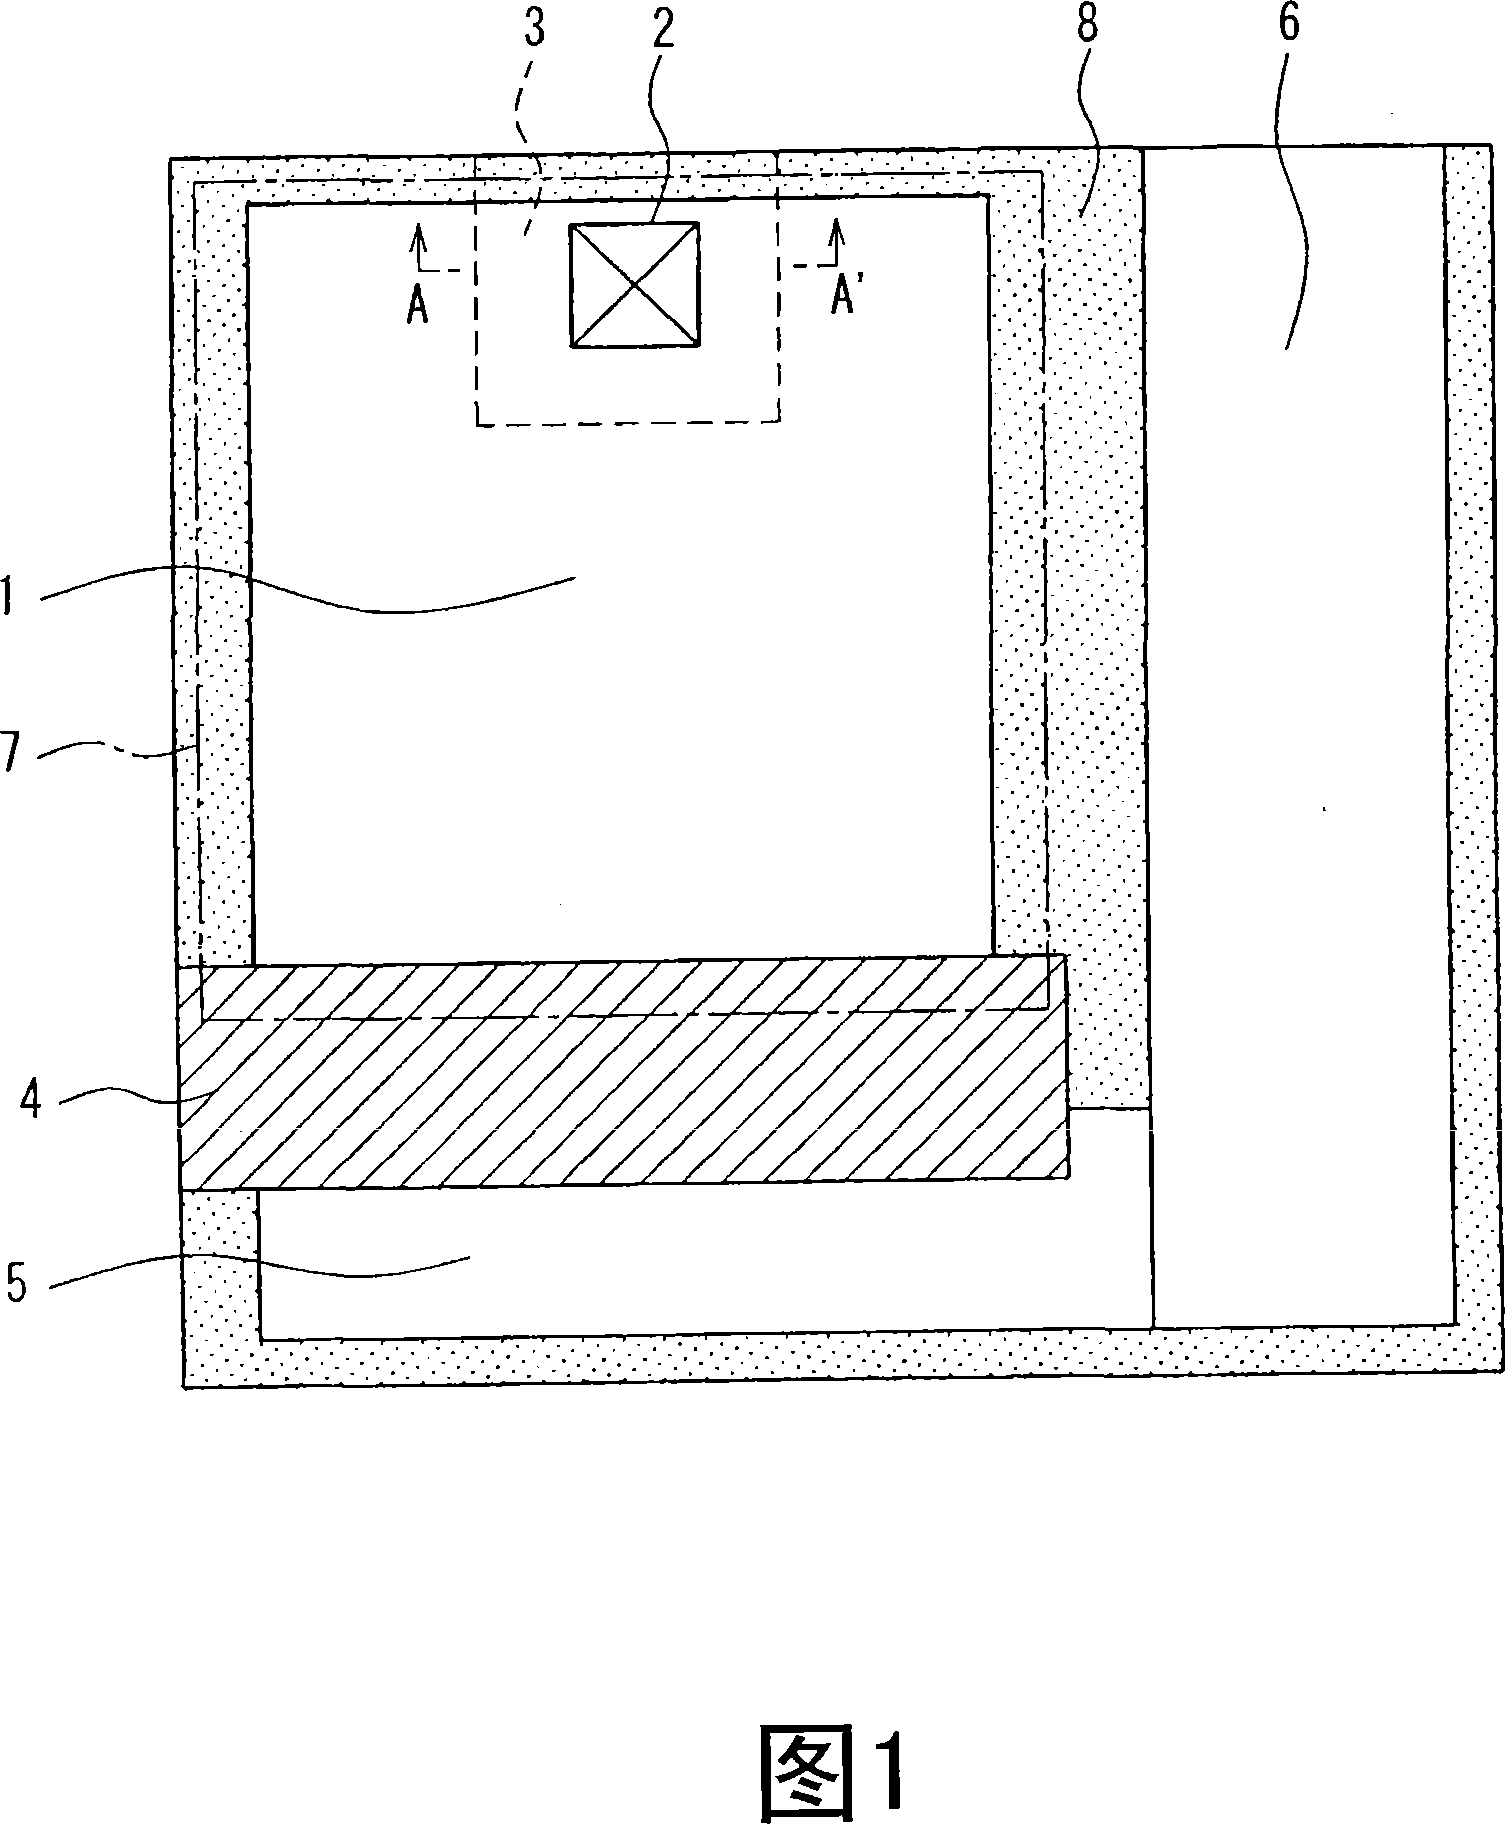 Amplified solid-state image pickup device